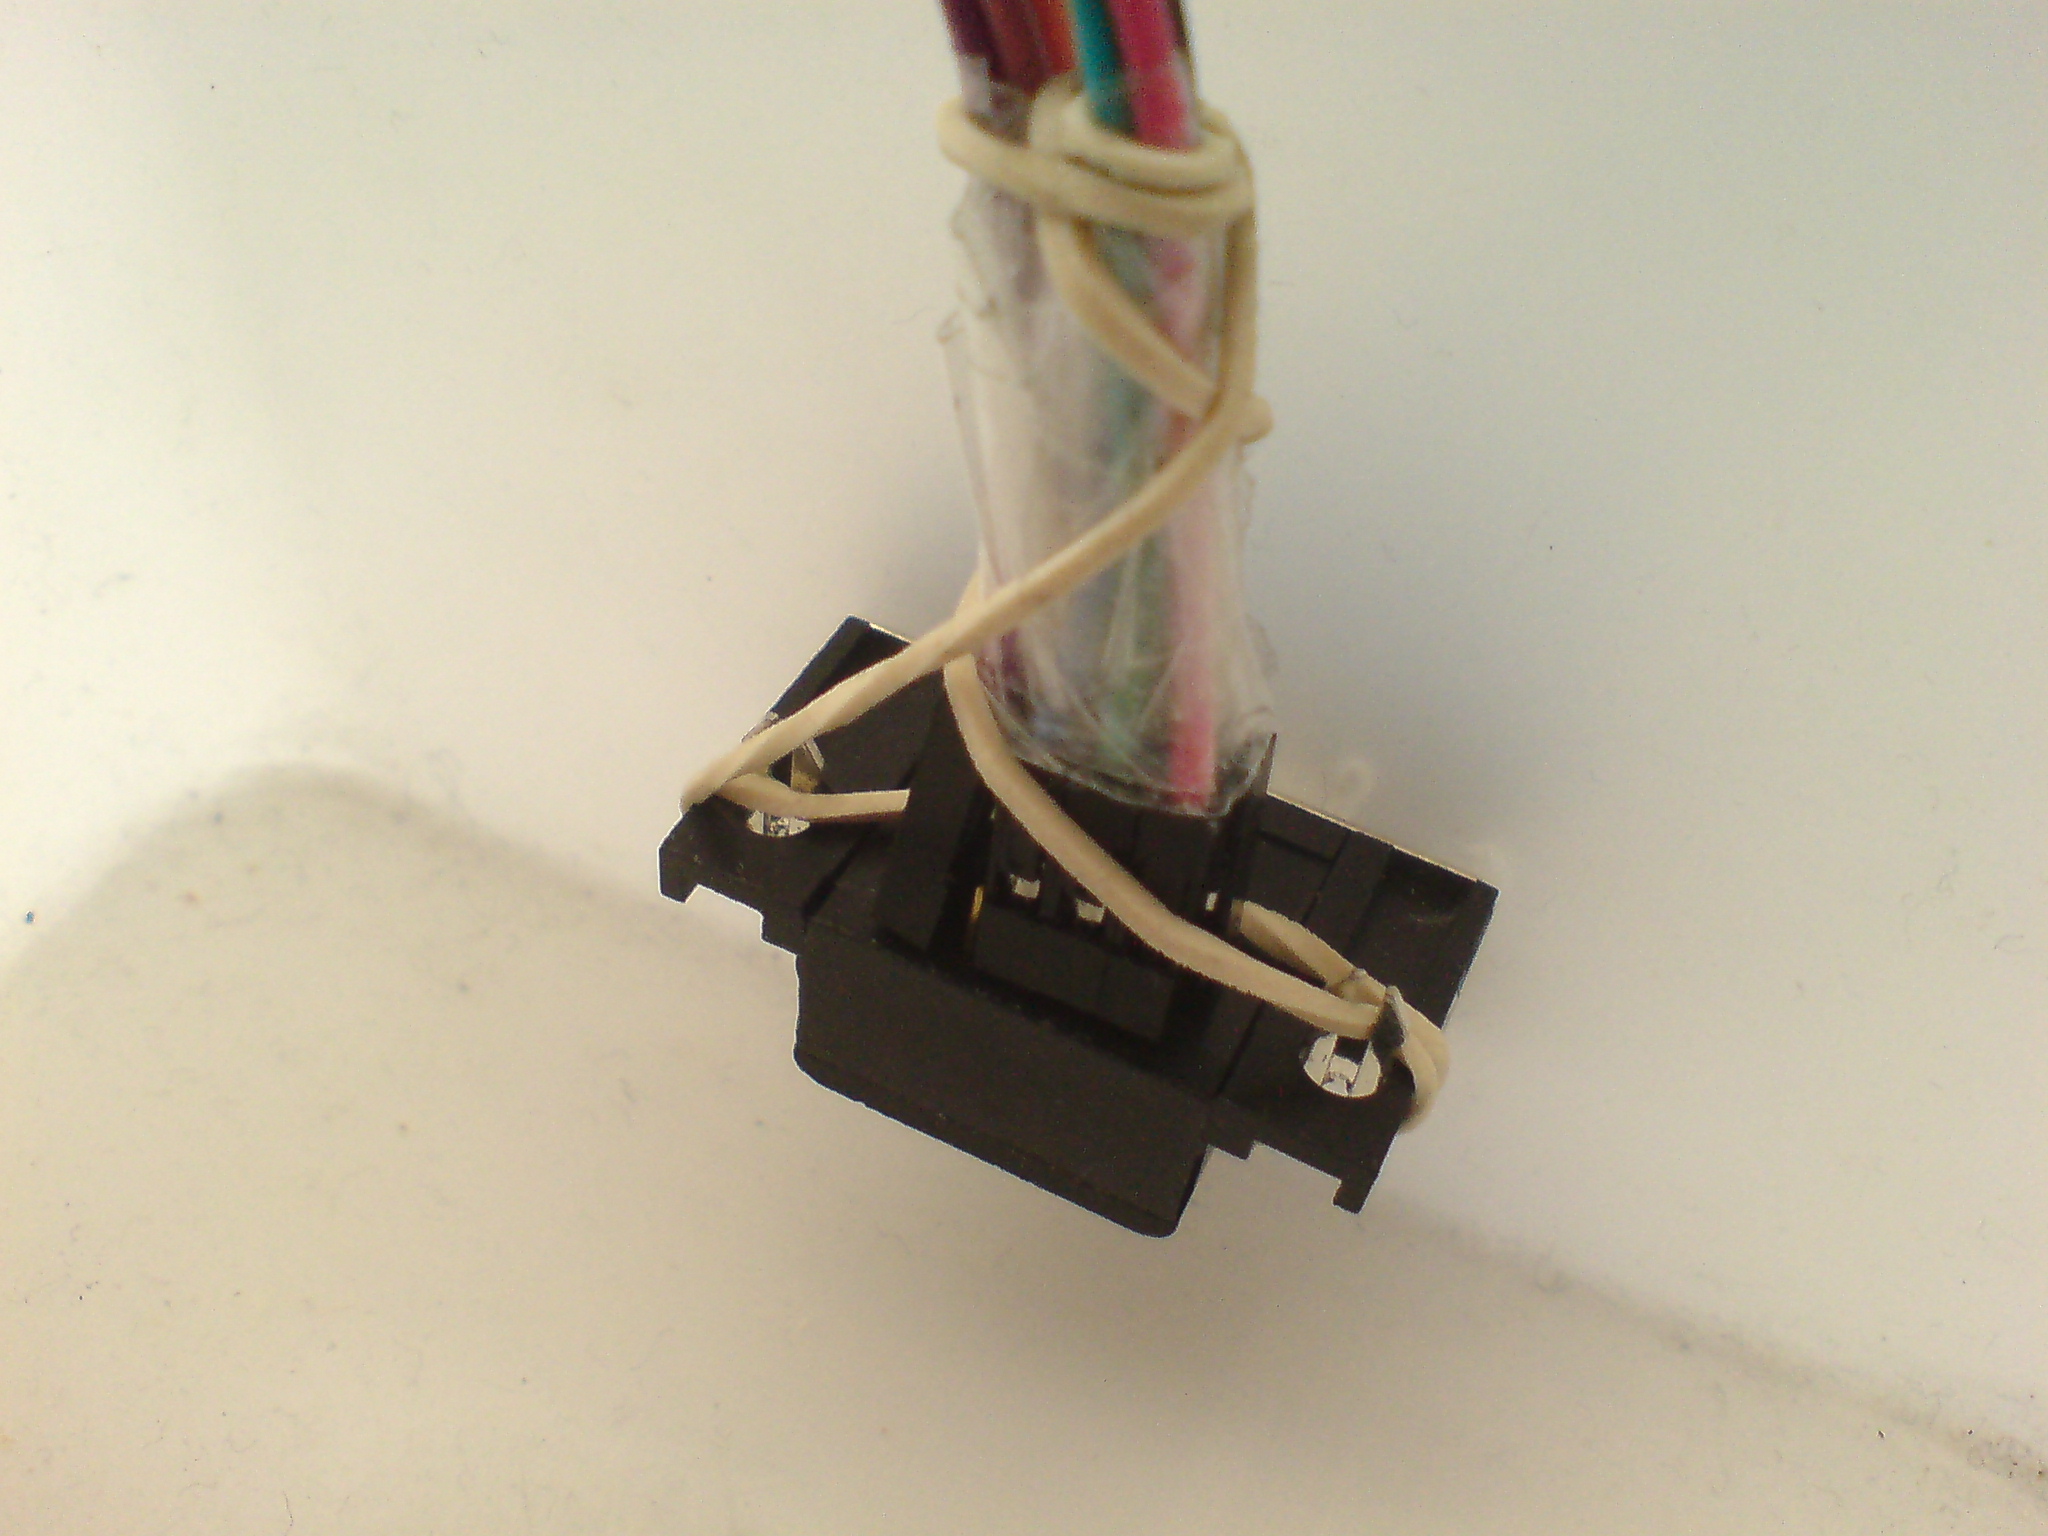 Use tape and rubber band to hold wires in socket